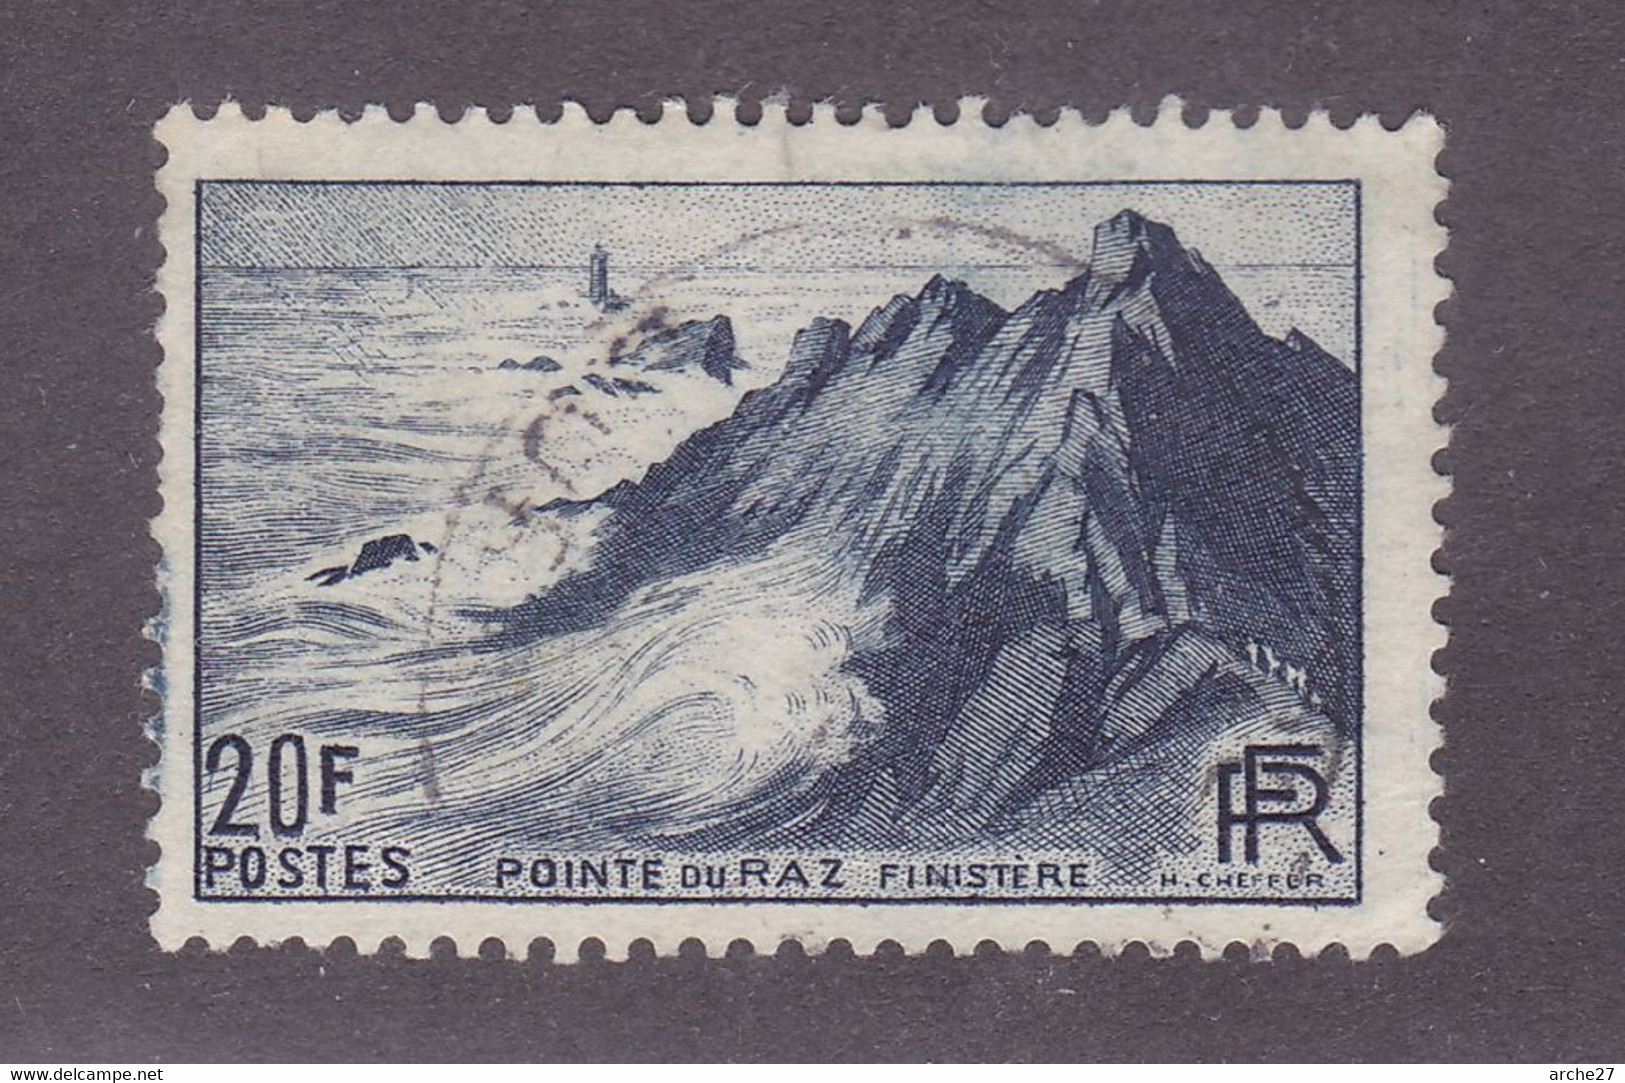 TIMBRE FRANCE N° 764 OBLITERE - Used Stamps